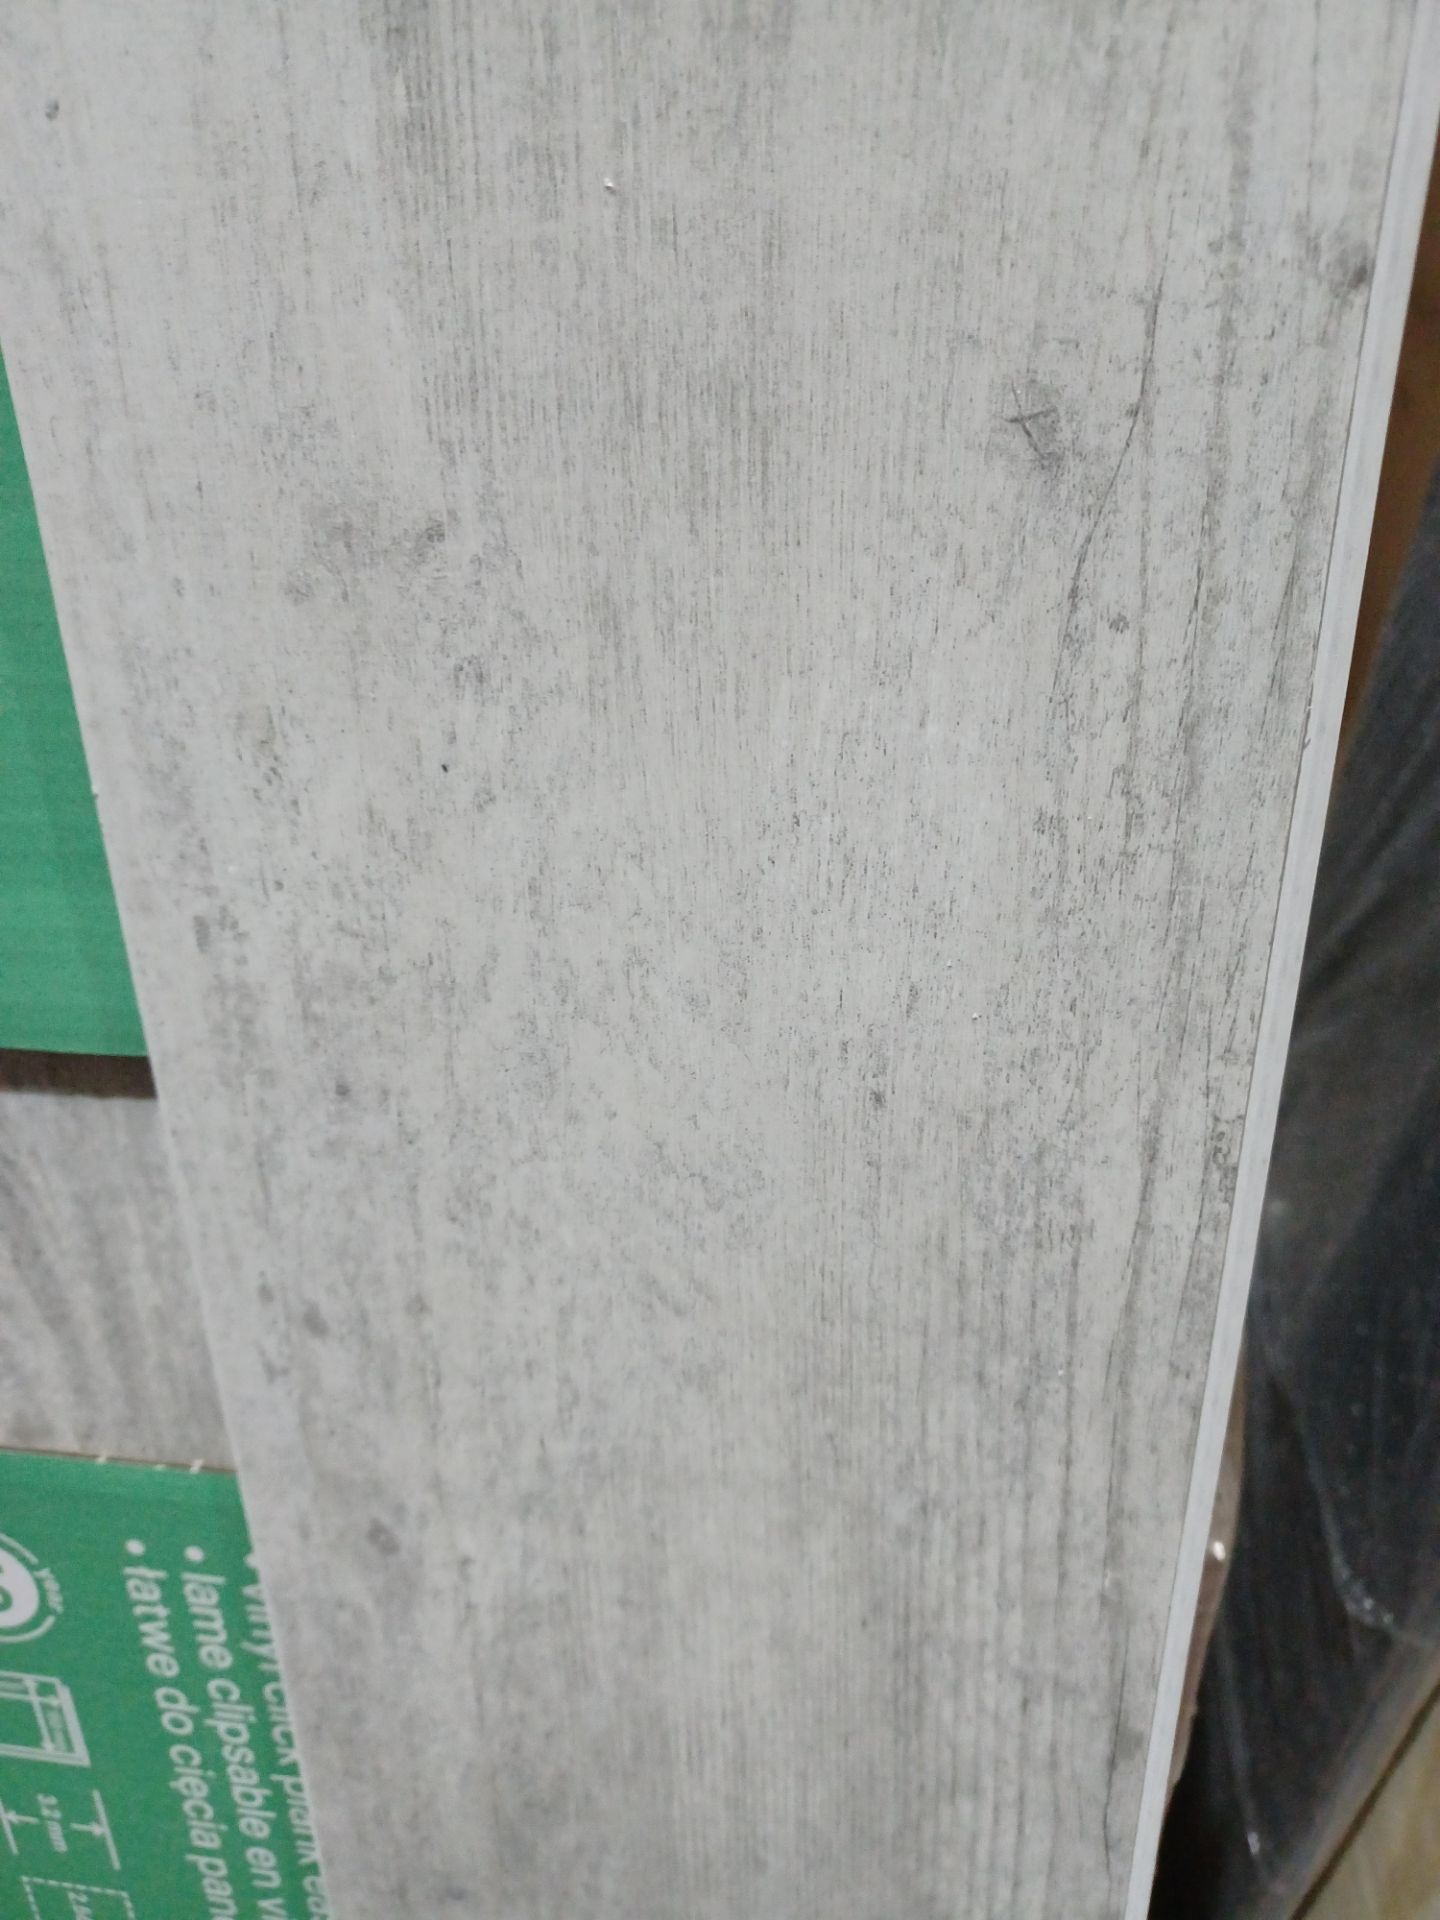 PALLET TO CONTAIN 52 x PACKS OF NEW BACHETA LUXURY VINYL CLICK PLANK FLOORING. RRP £58 PER PACK. - Image 2 of 2